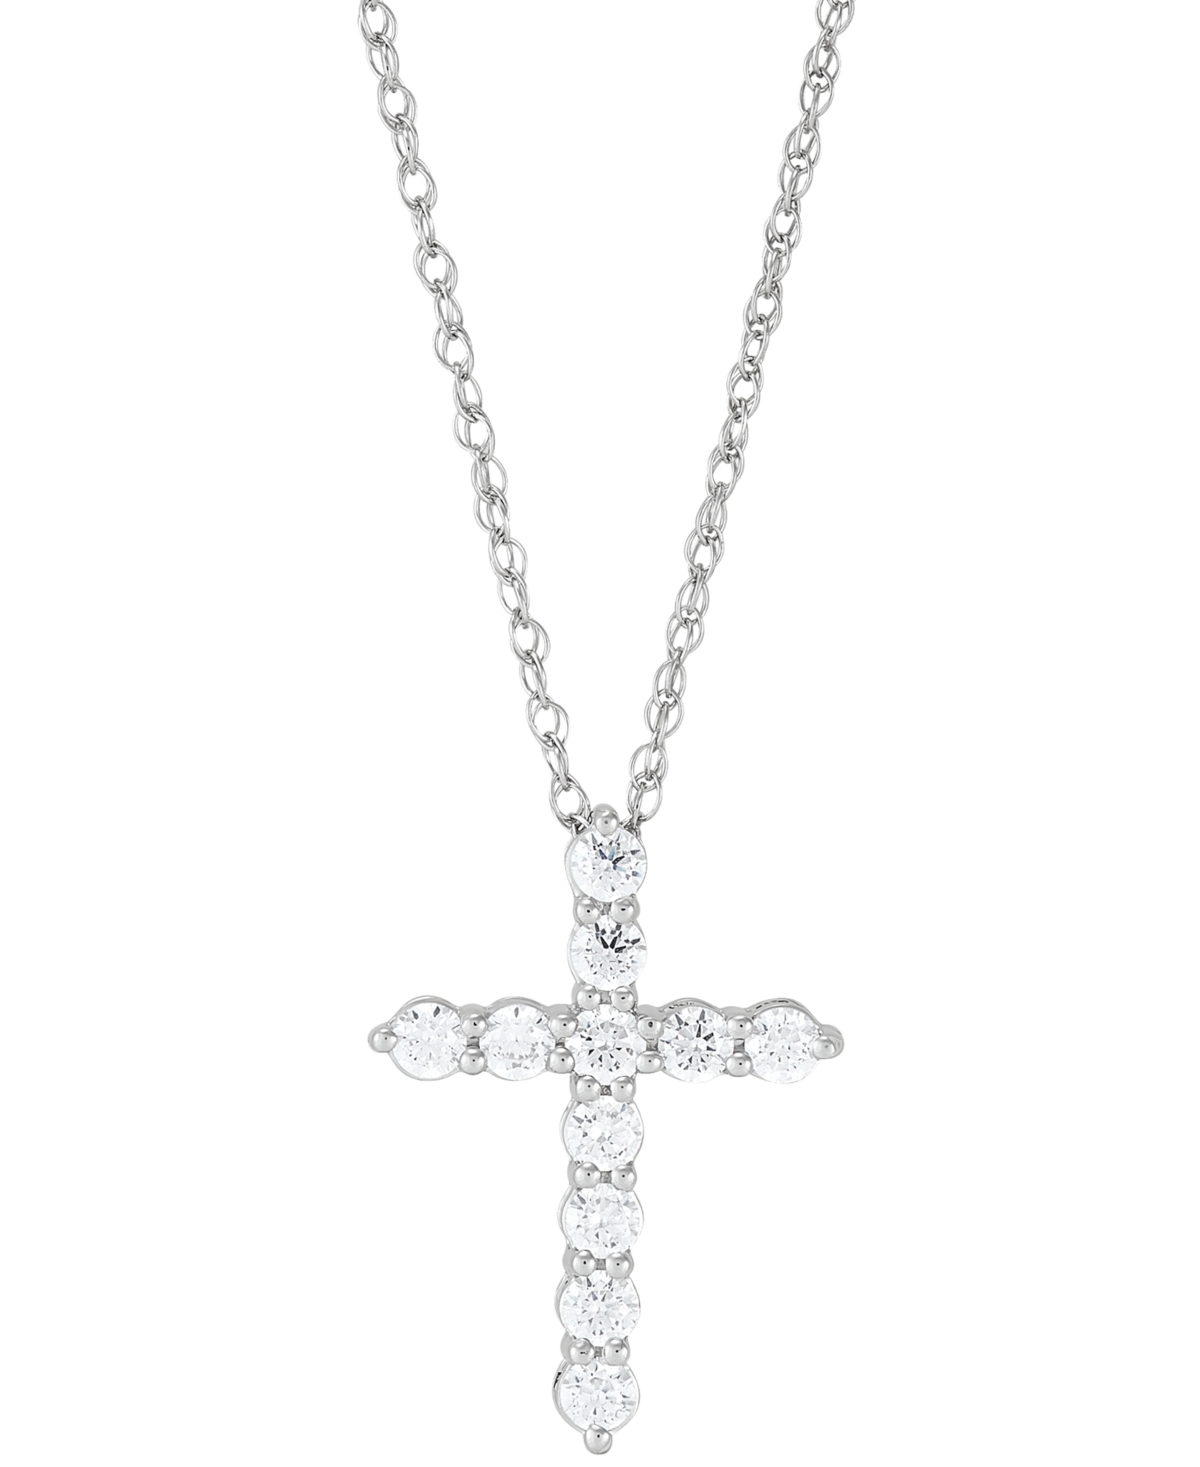 Lab Grown Diamond Cross Pendant Necklace (1 ct. t.w.) in 14k White Gold, 16" + 2" extender - White Gold